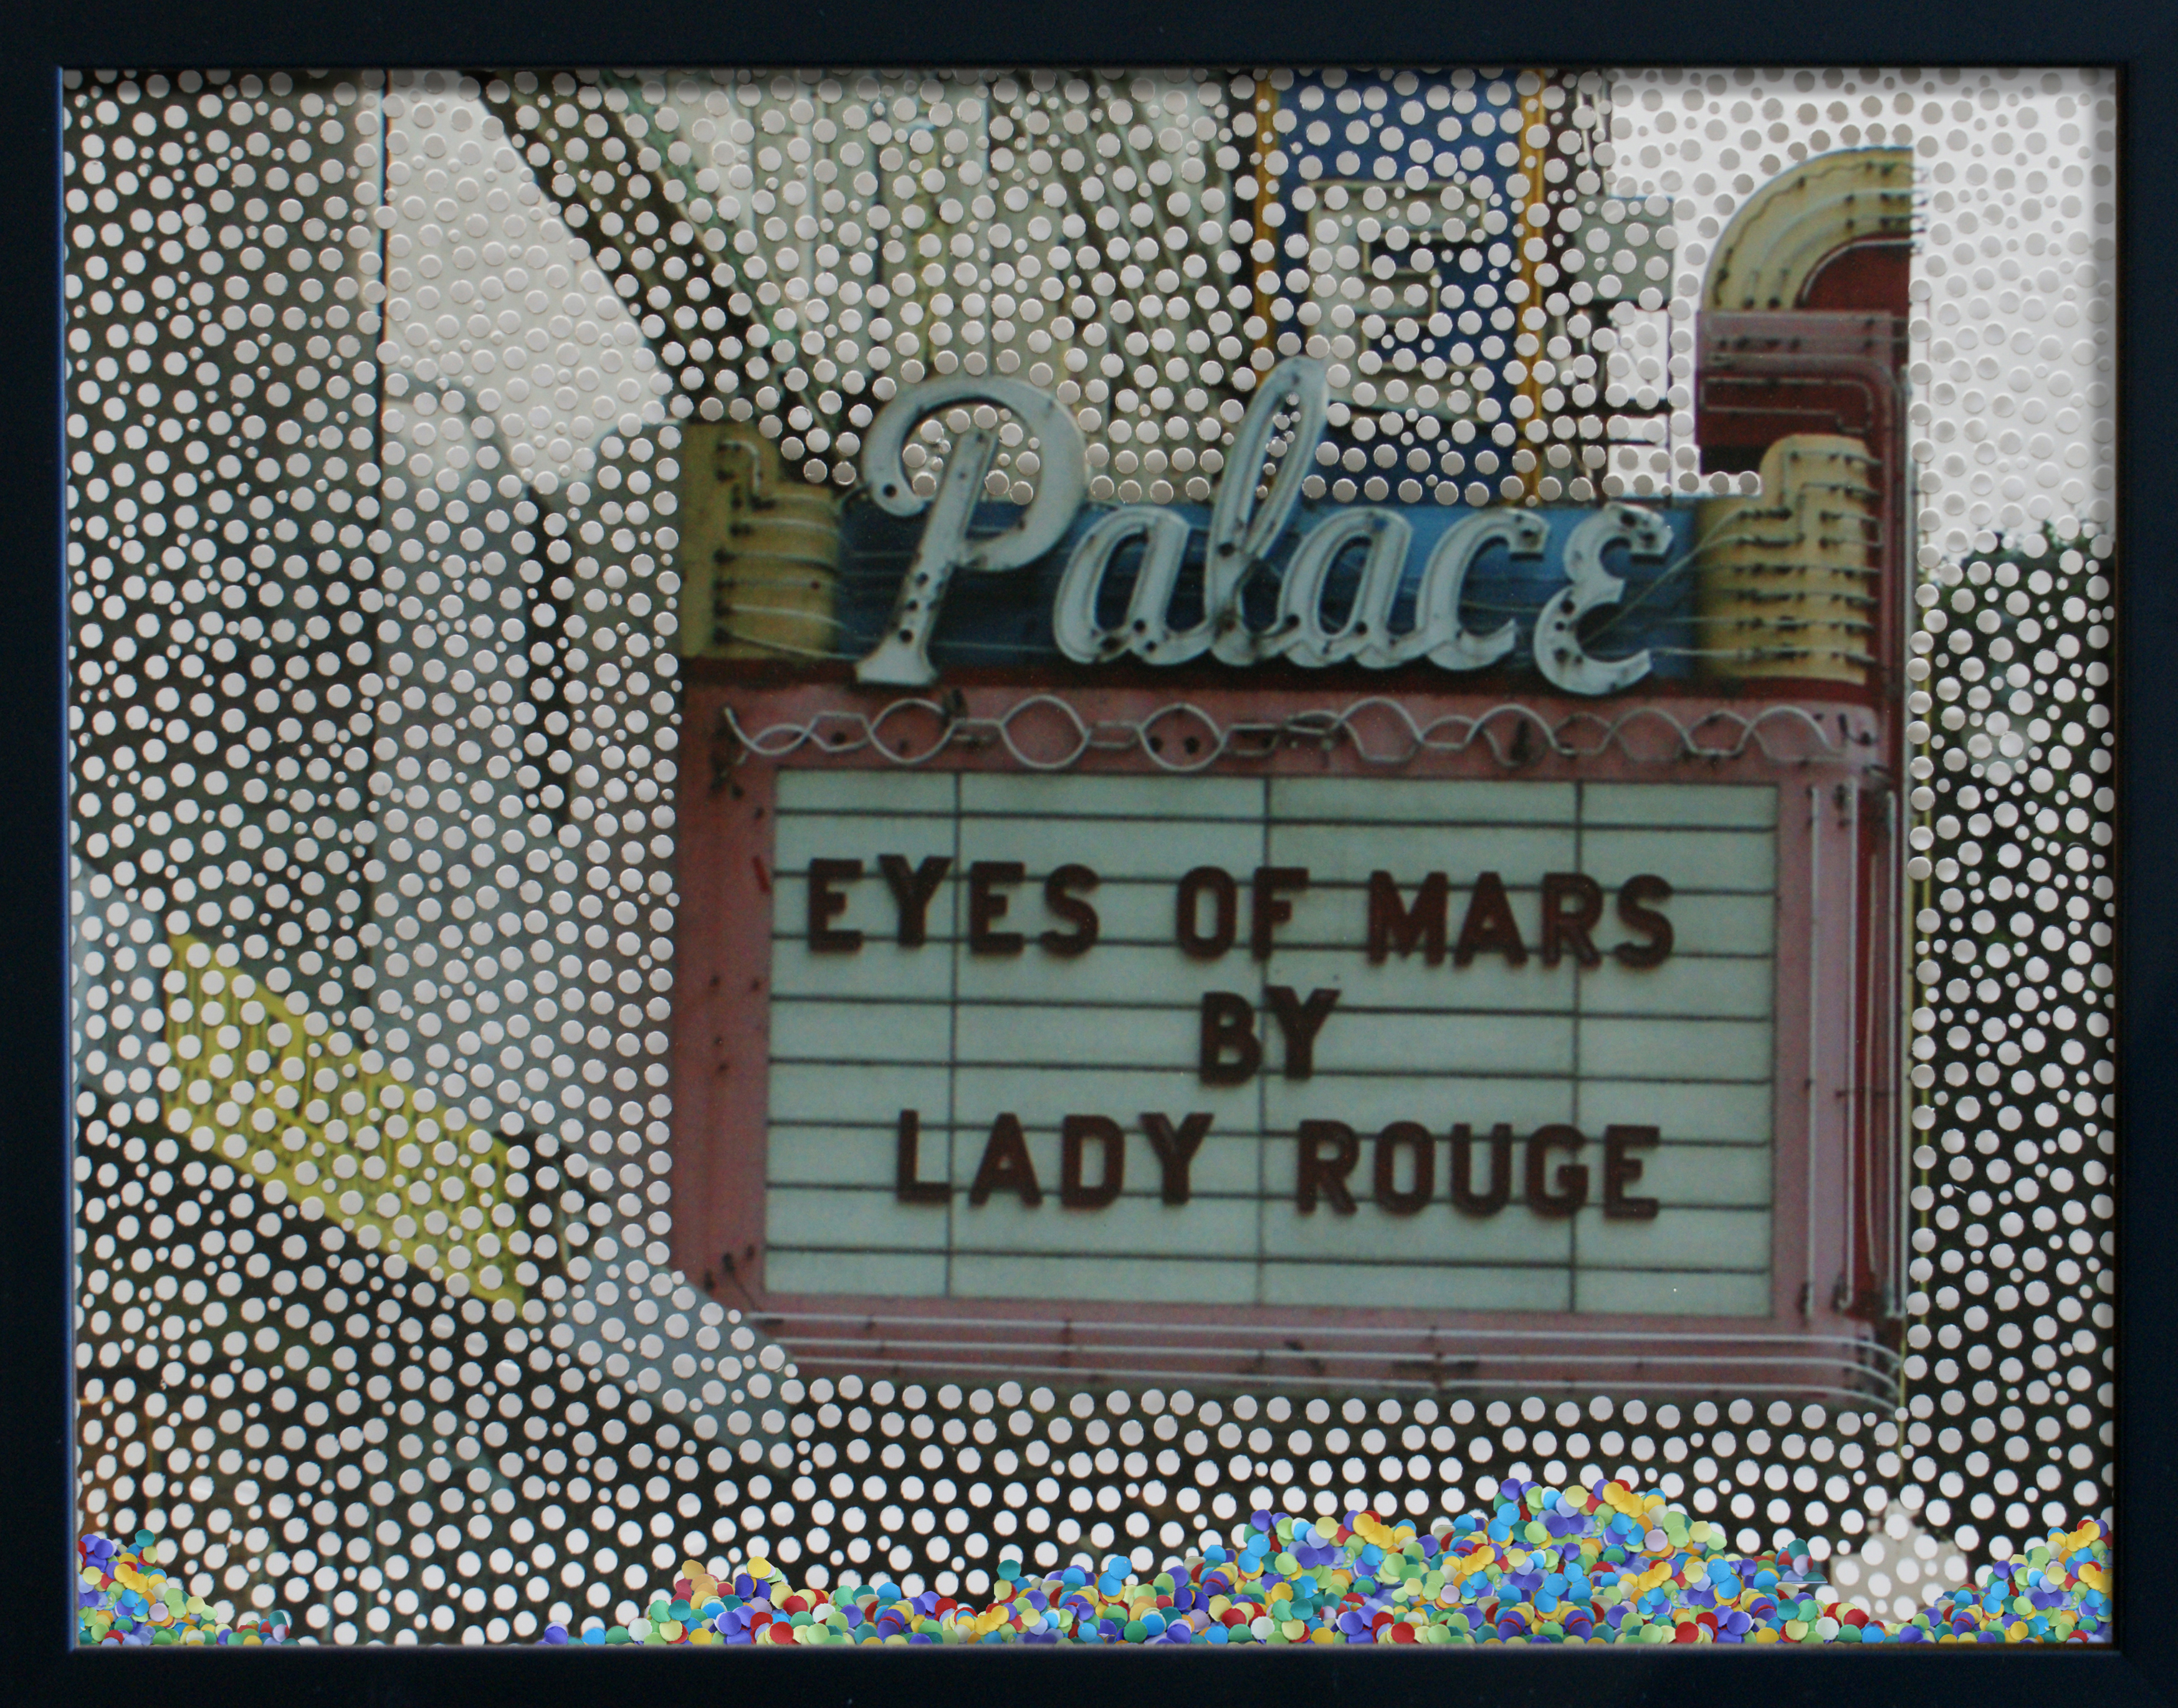 S. Broadway - Los Angeles: Palace, 2010